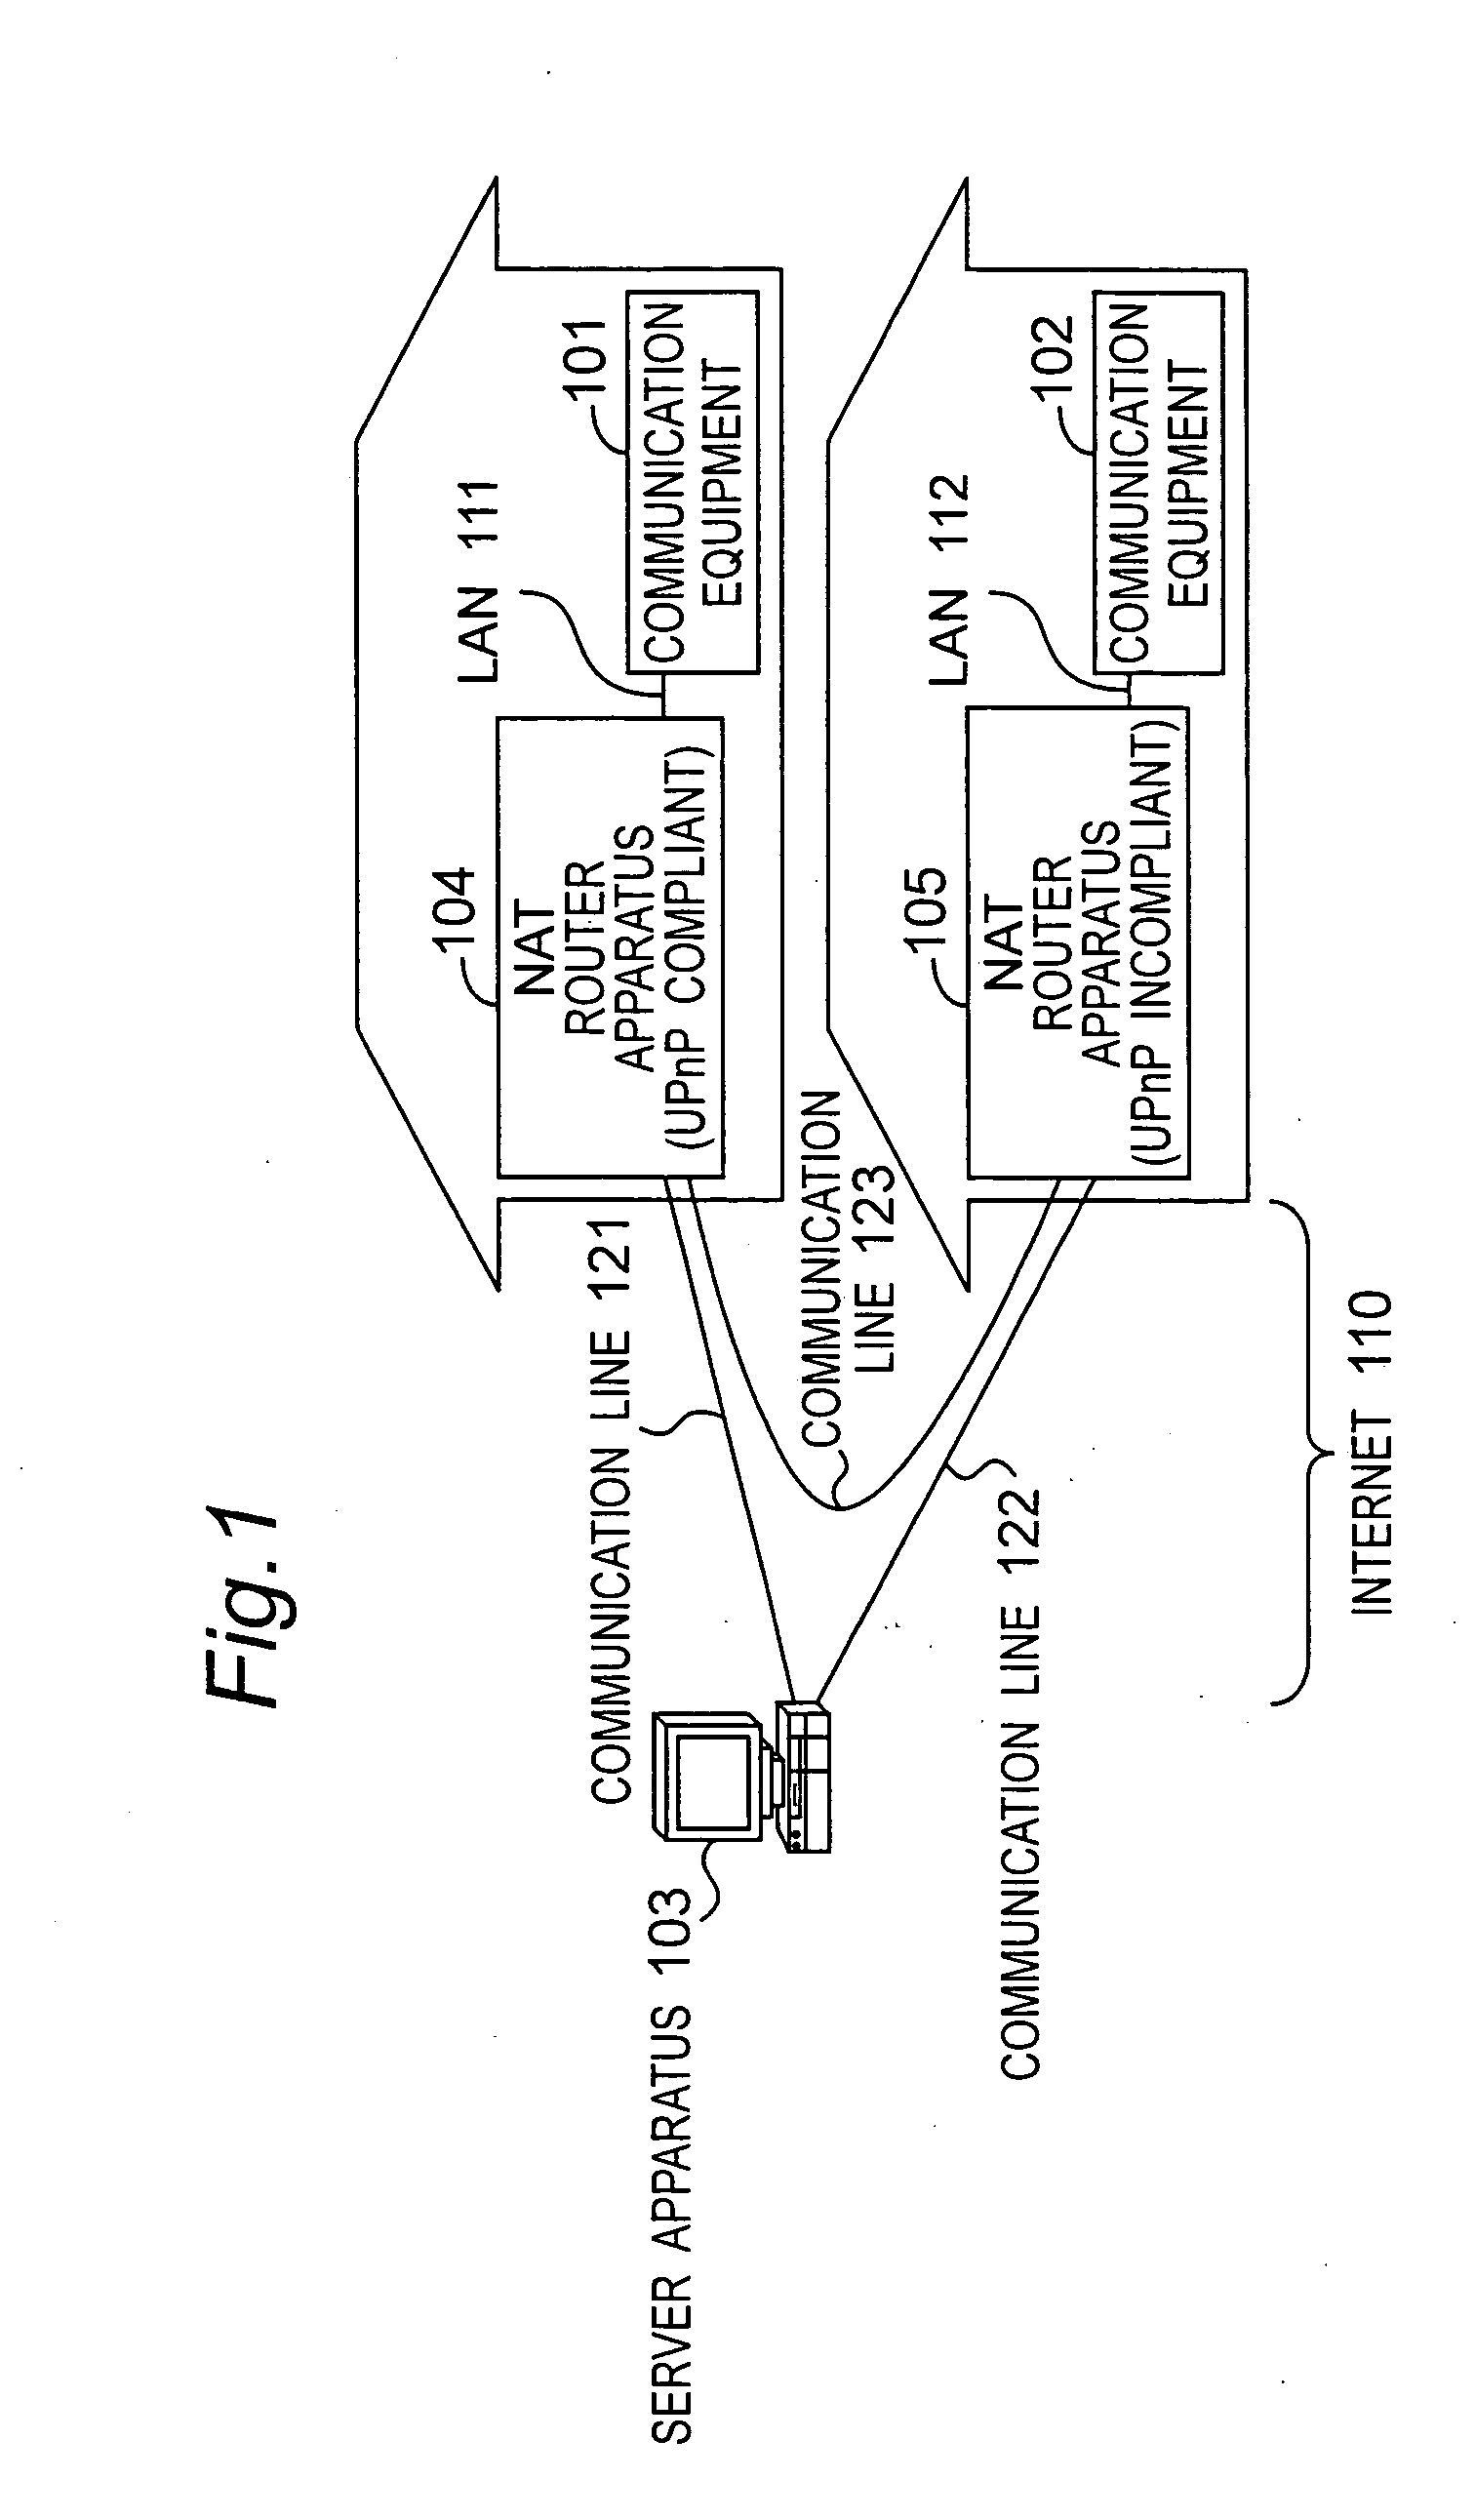 Communication System for Use in Communication Between Communication Equipment by Using Ip Protocol